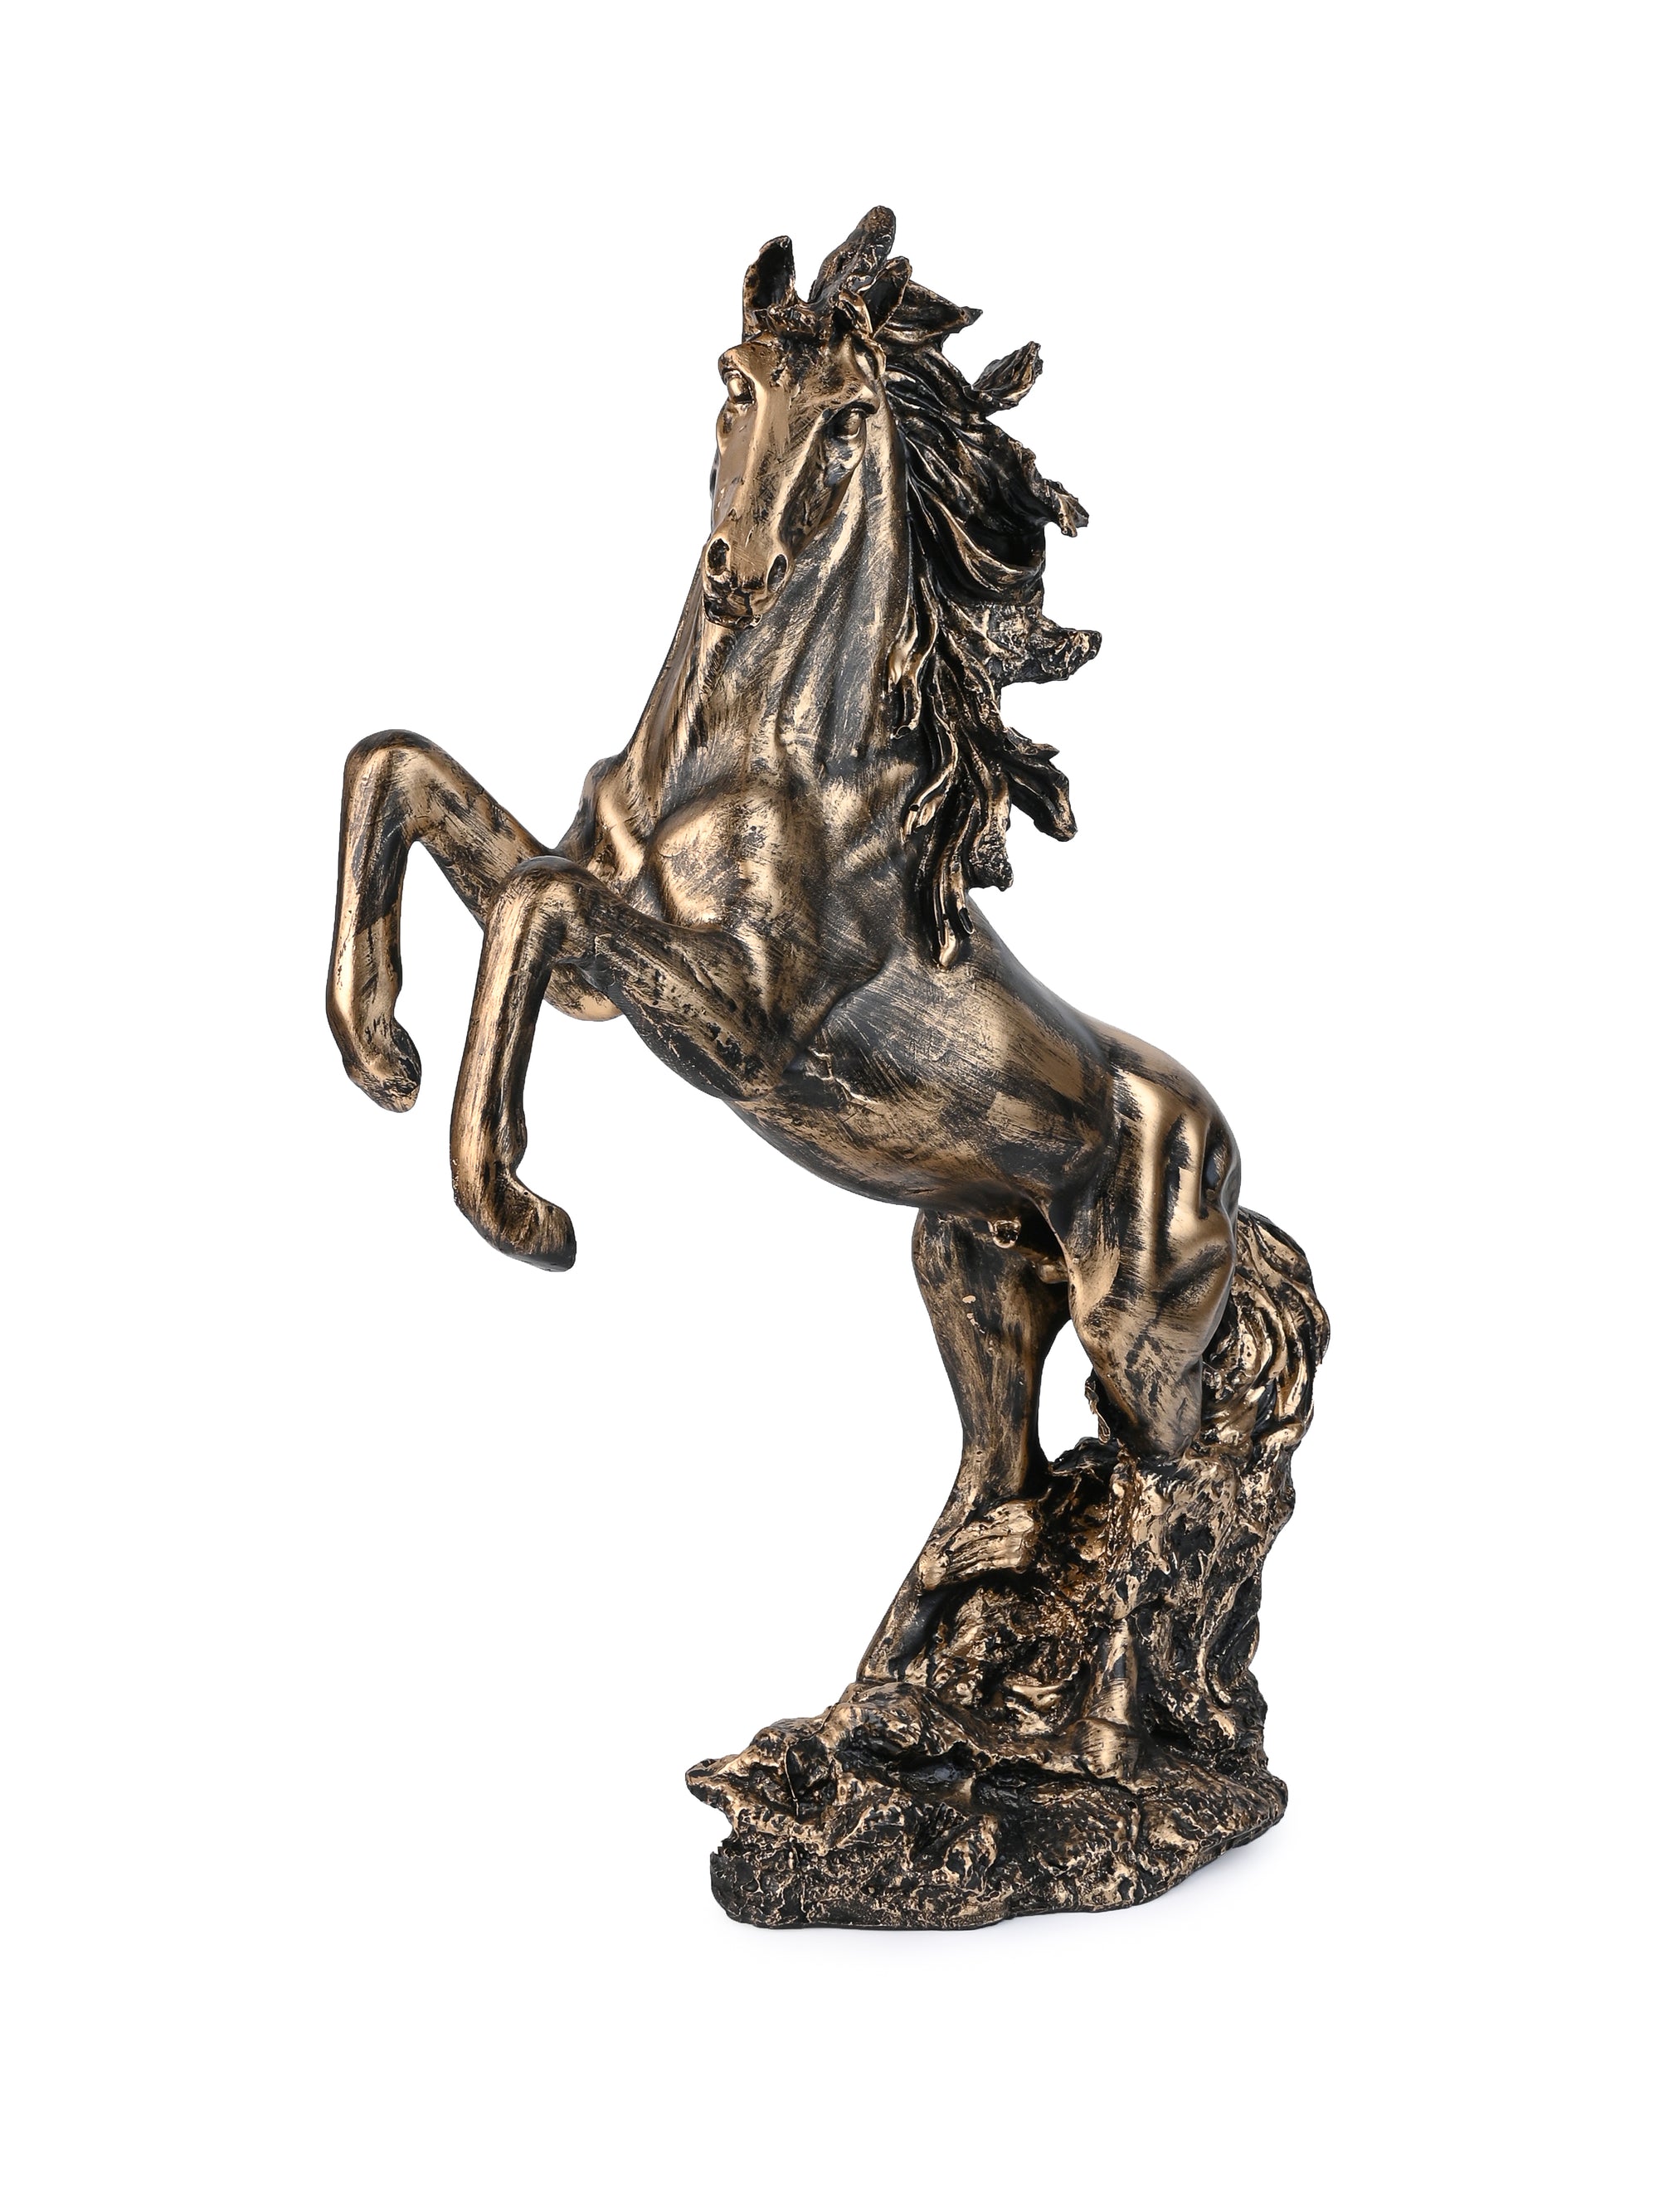 Resin Crafted Rearing Horse Decorative Statue - 2 feet height